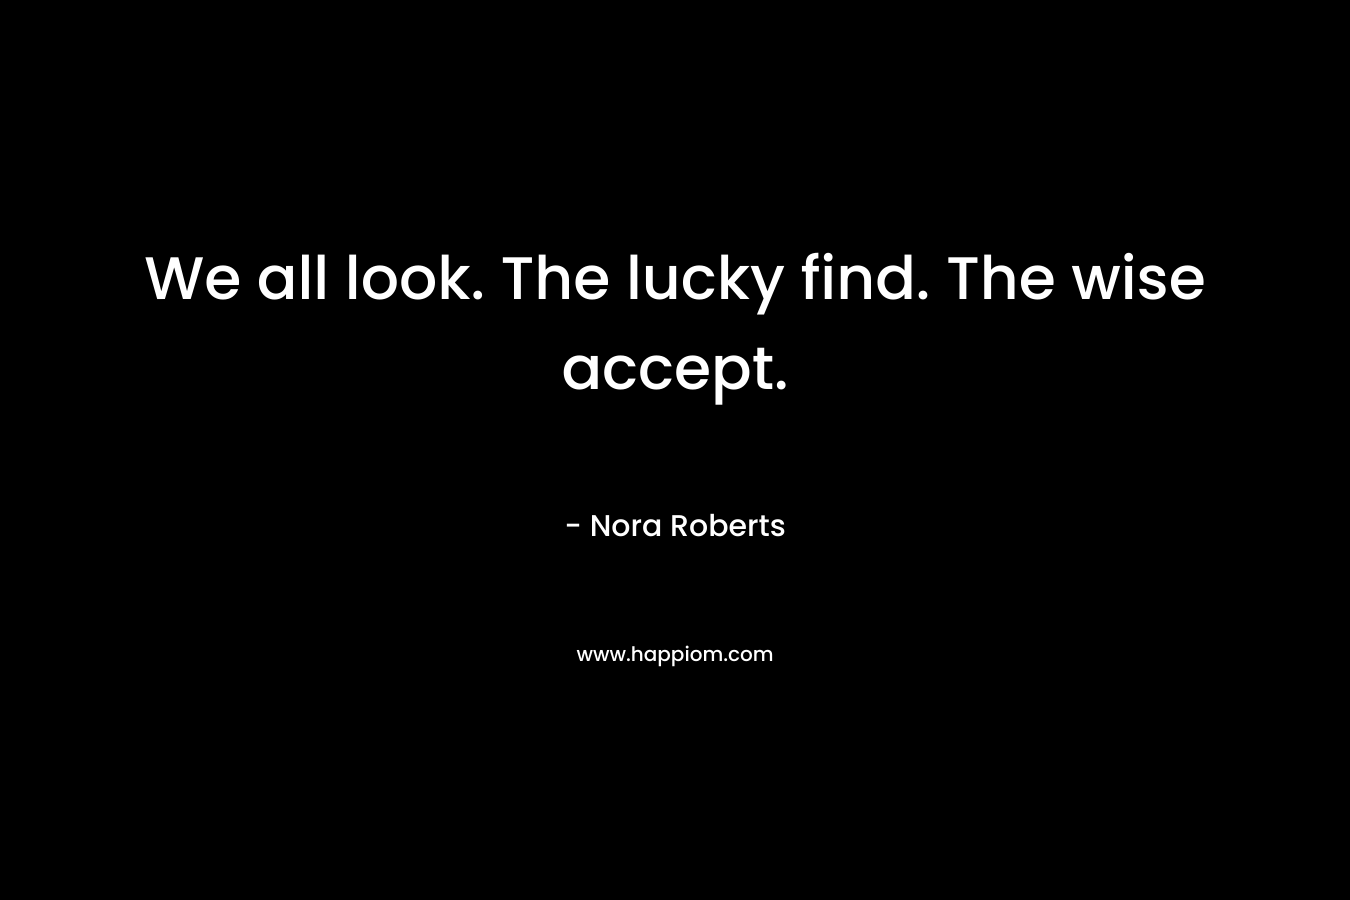 We all look. The lucky find. The wise accept. – Nora Roberts